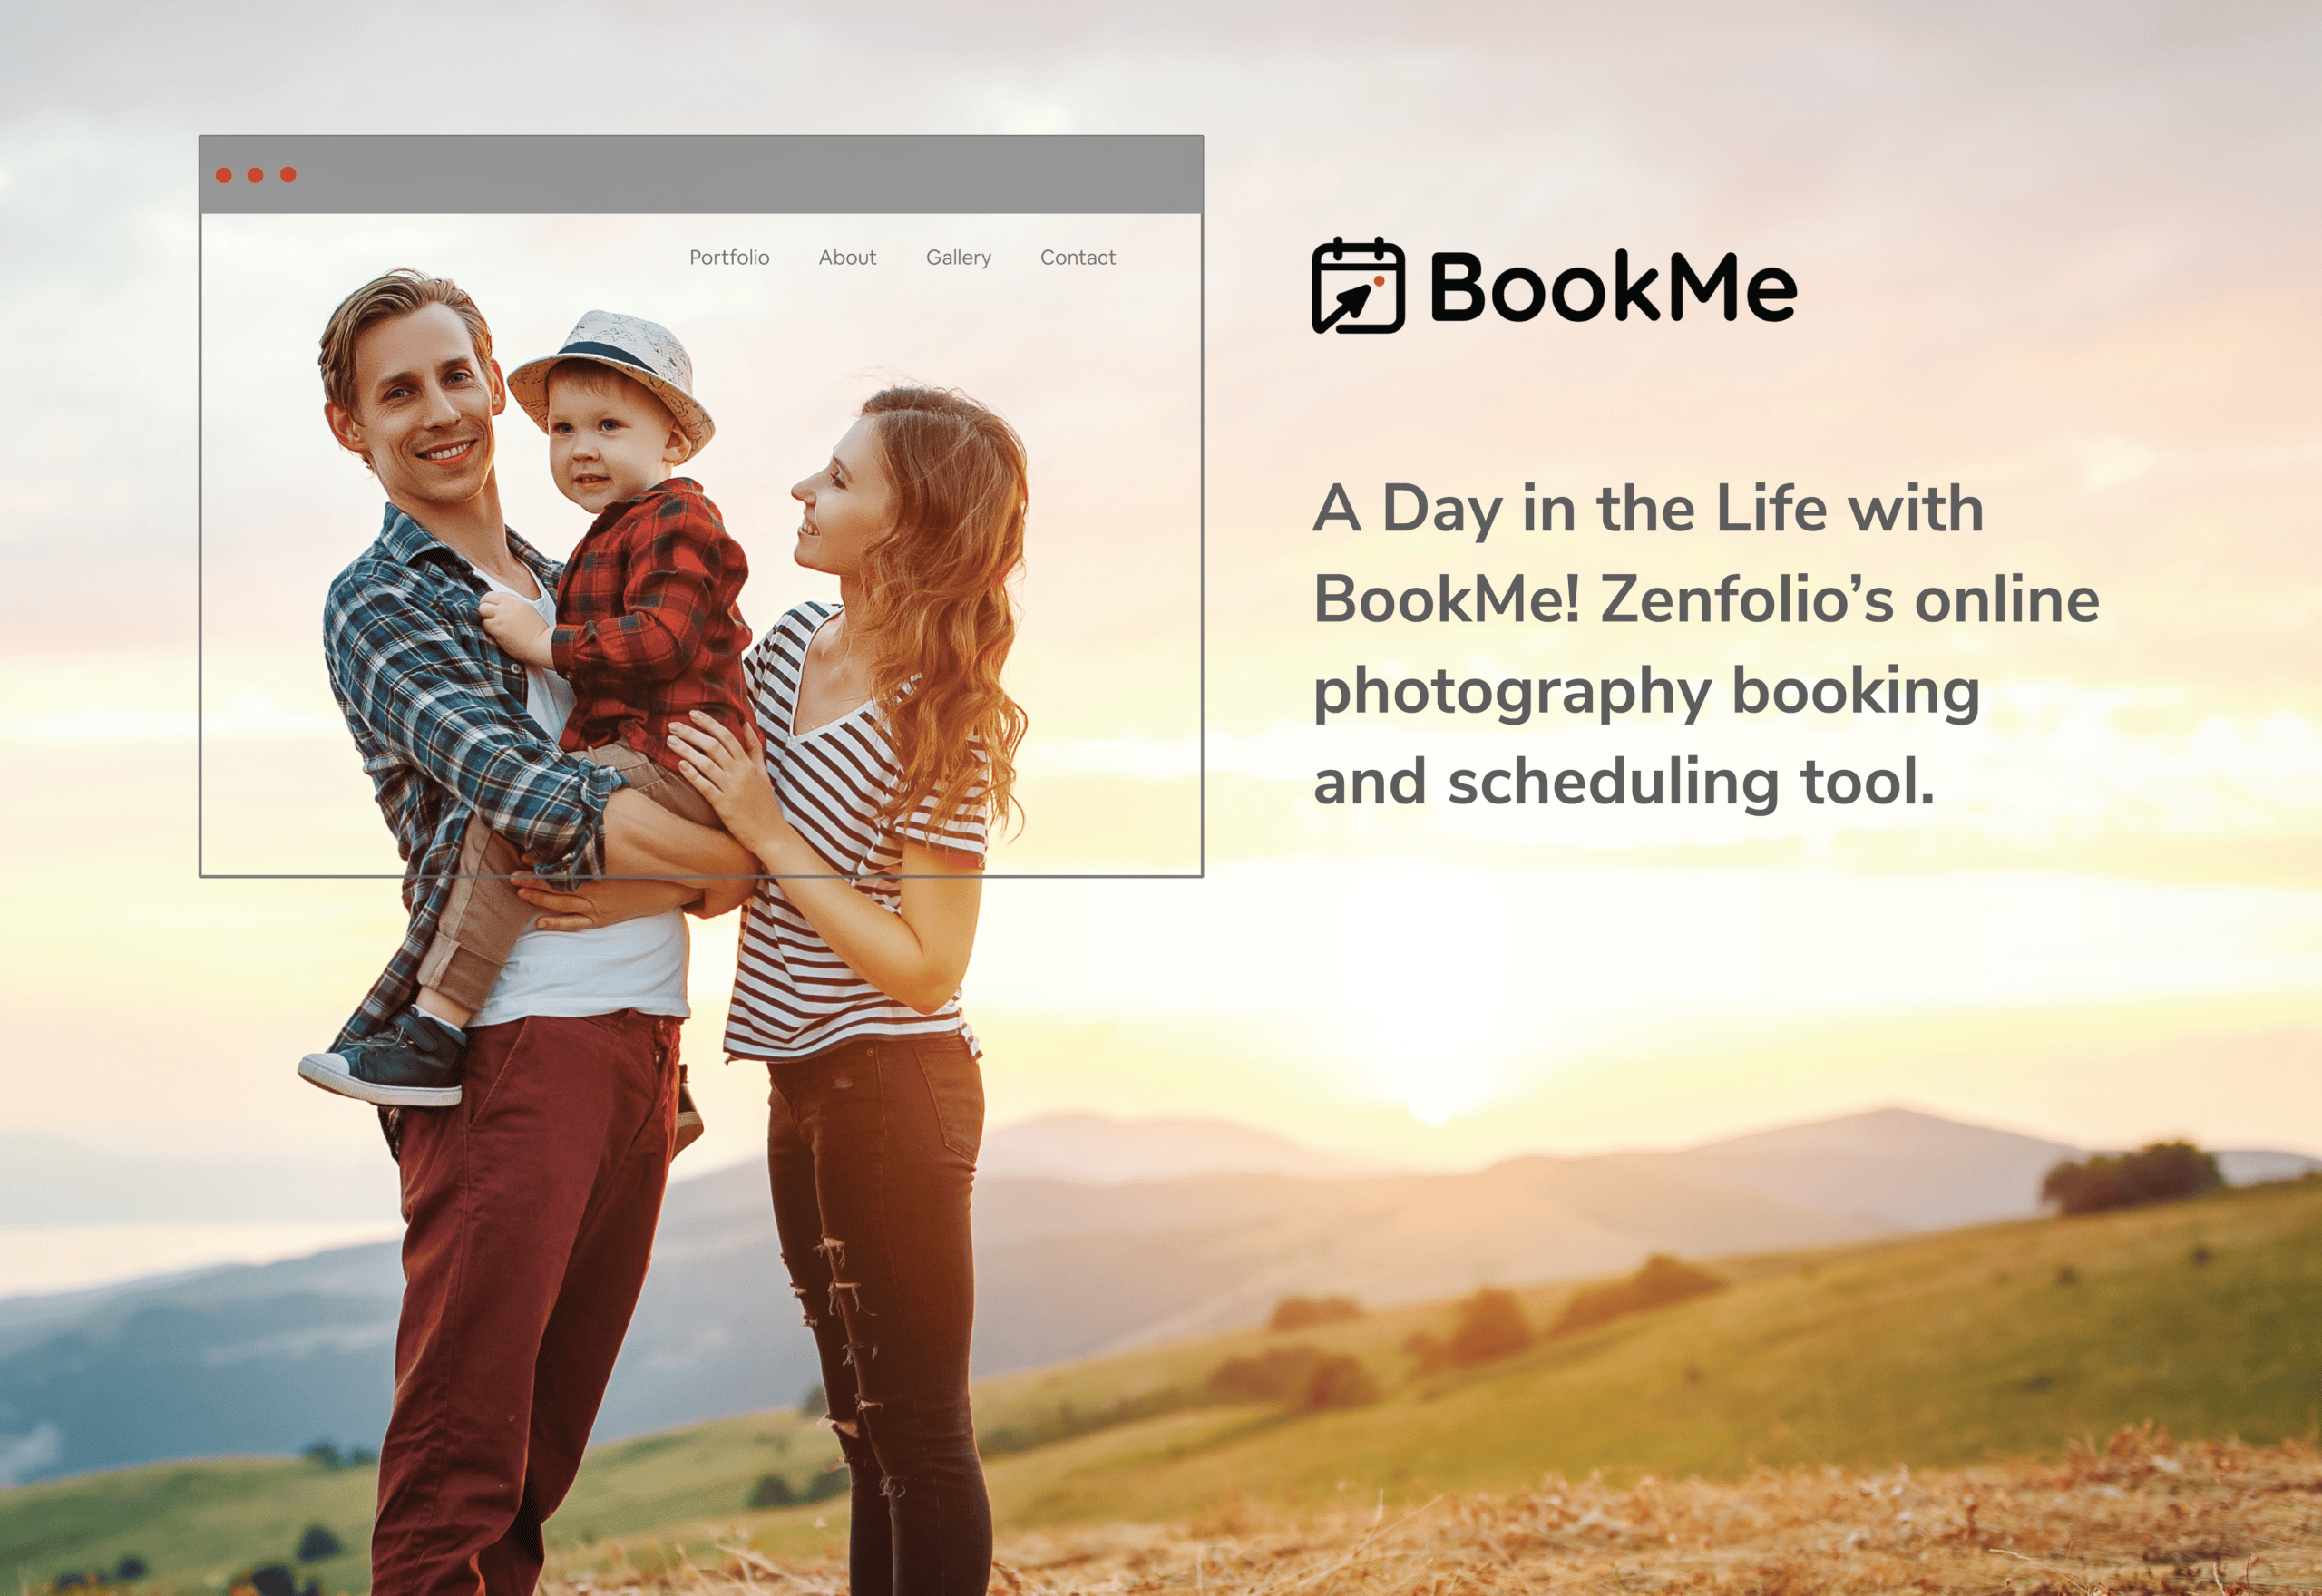 Getting down to business with BookMe, Zenfolio’s online photography booking and scheduling tool